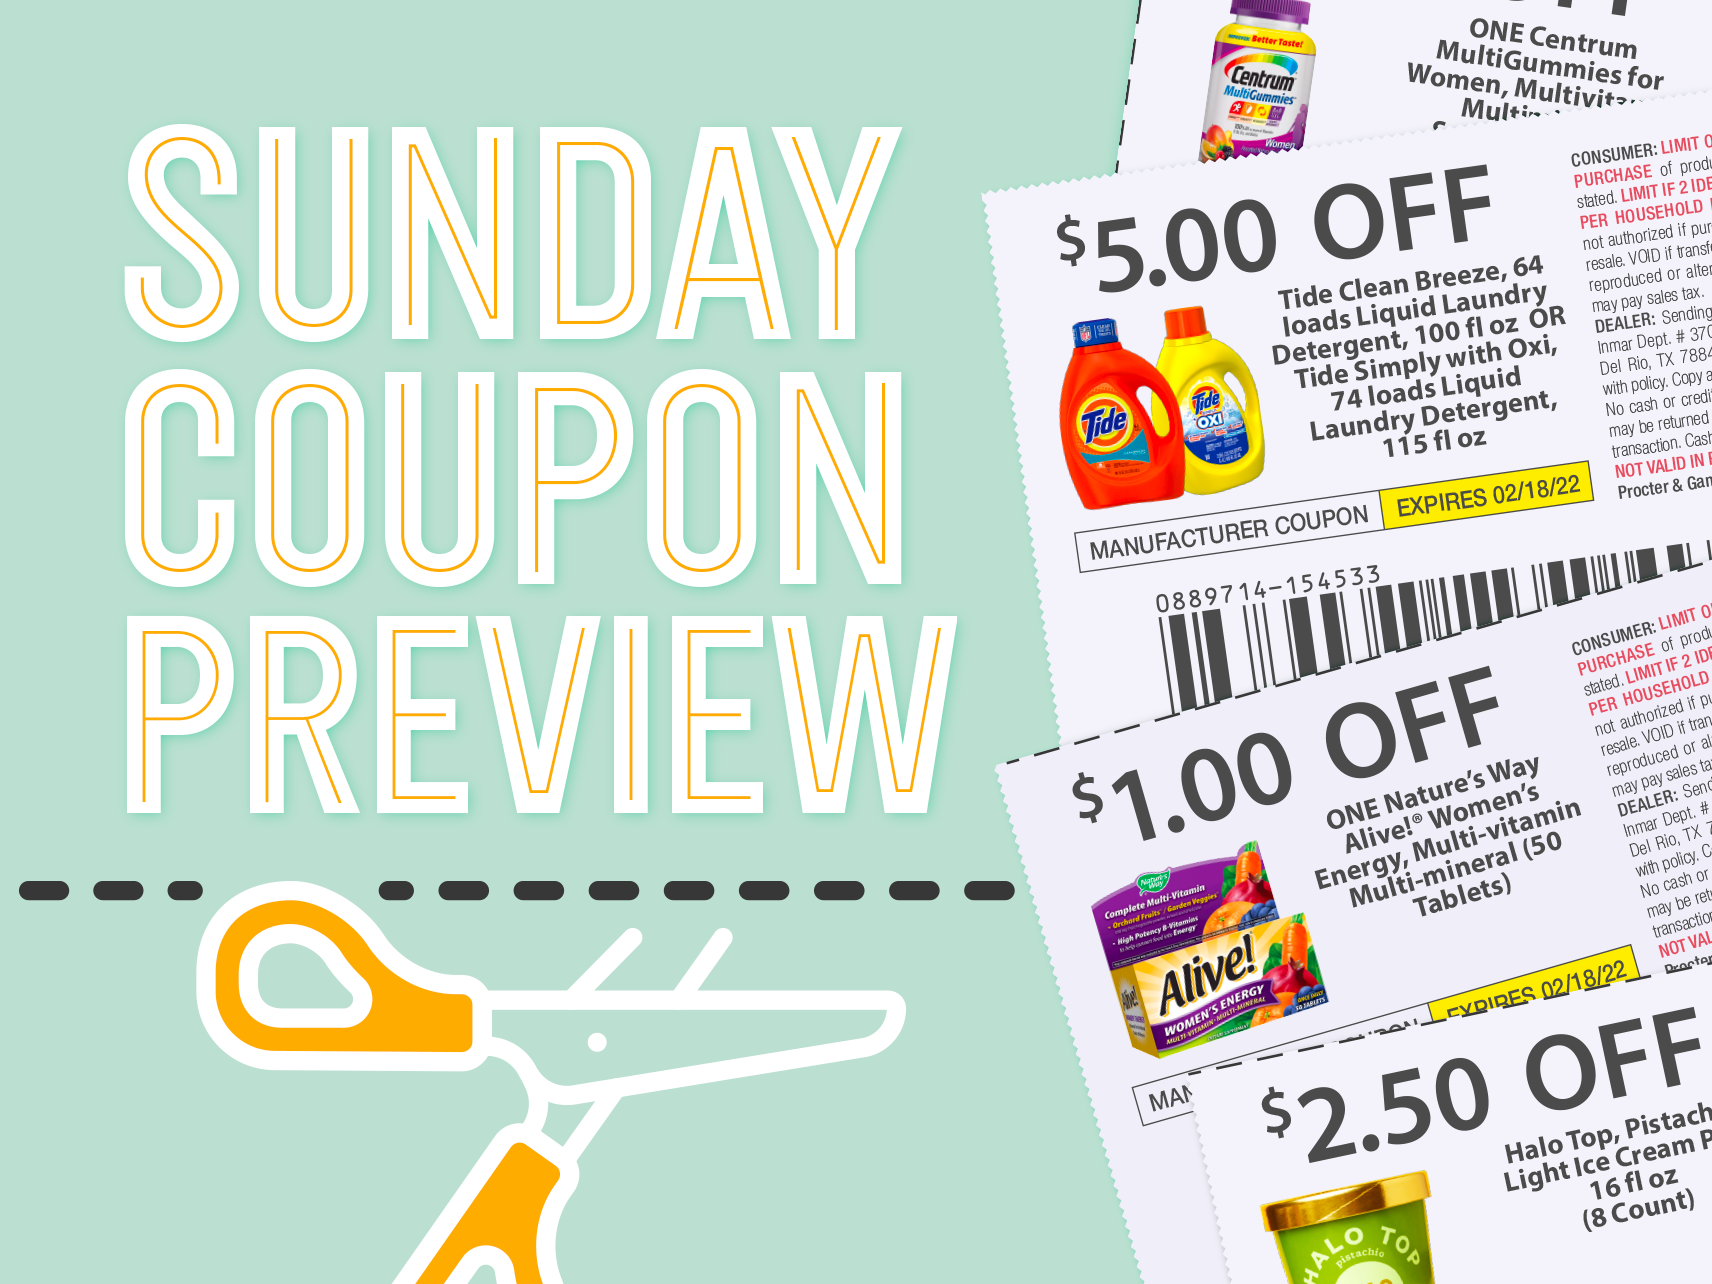 Sunday Coupon Preview For 8/13 – One Insert